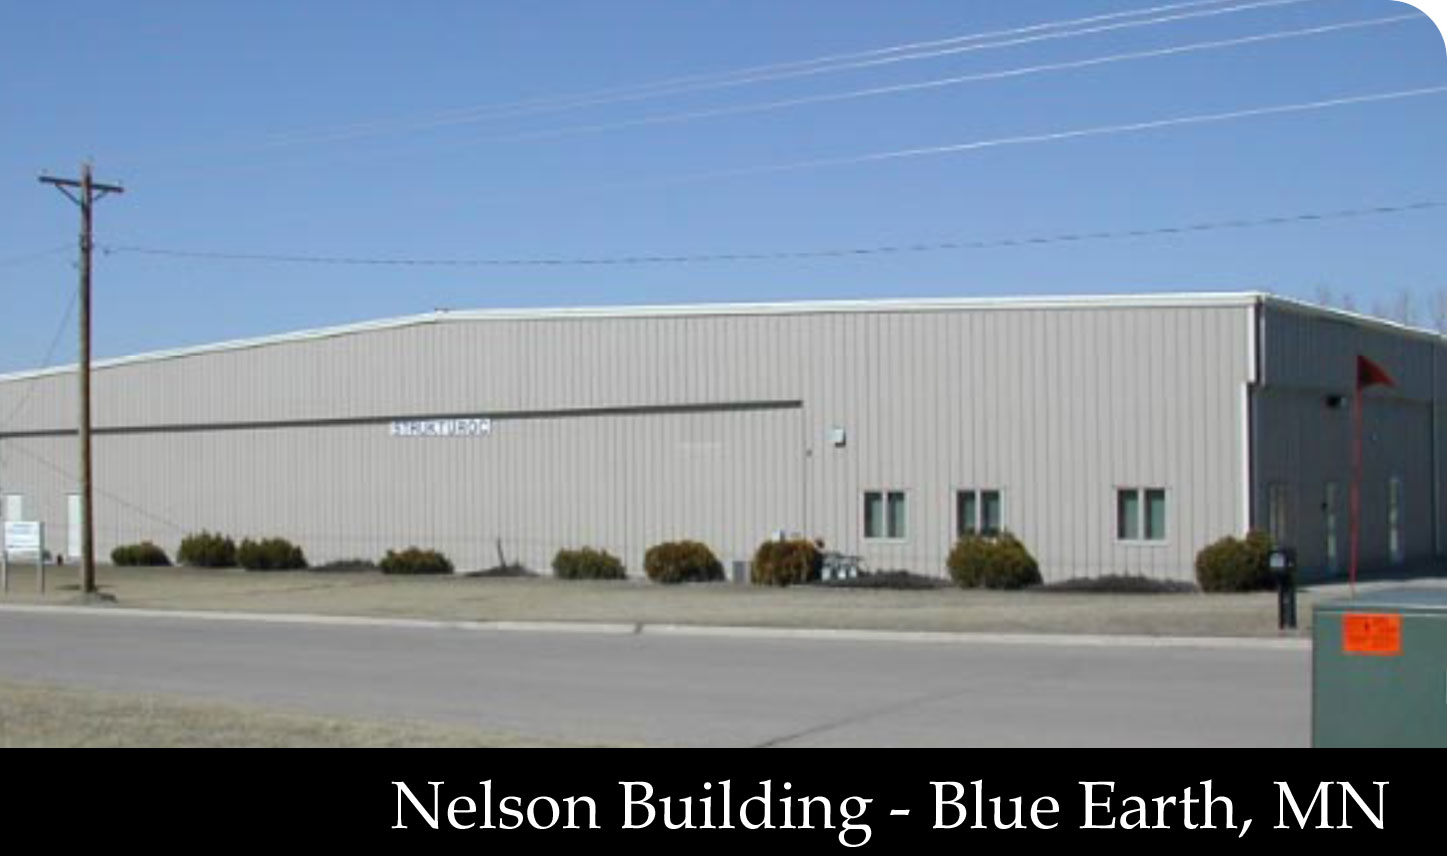 Nelson Building - Blue Earth, MN